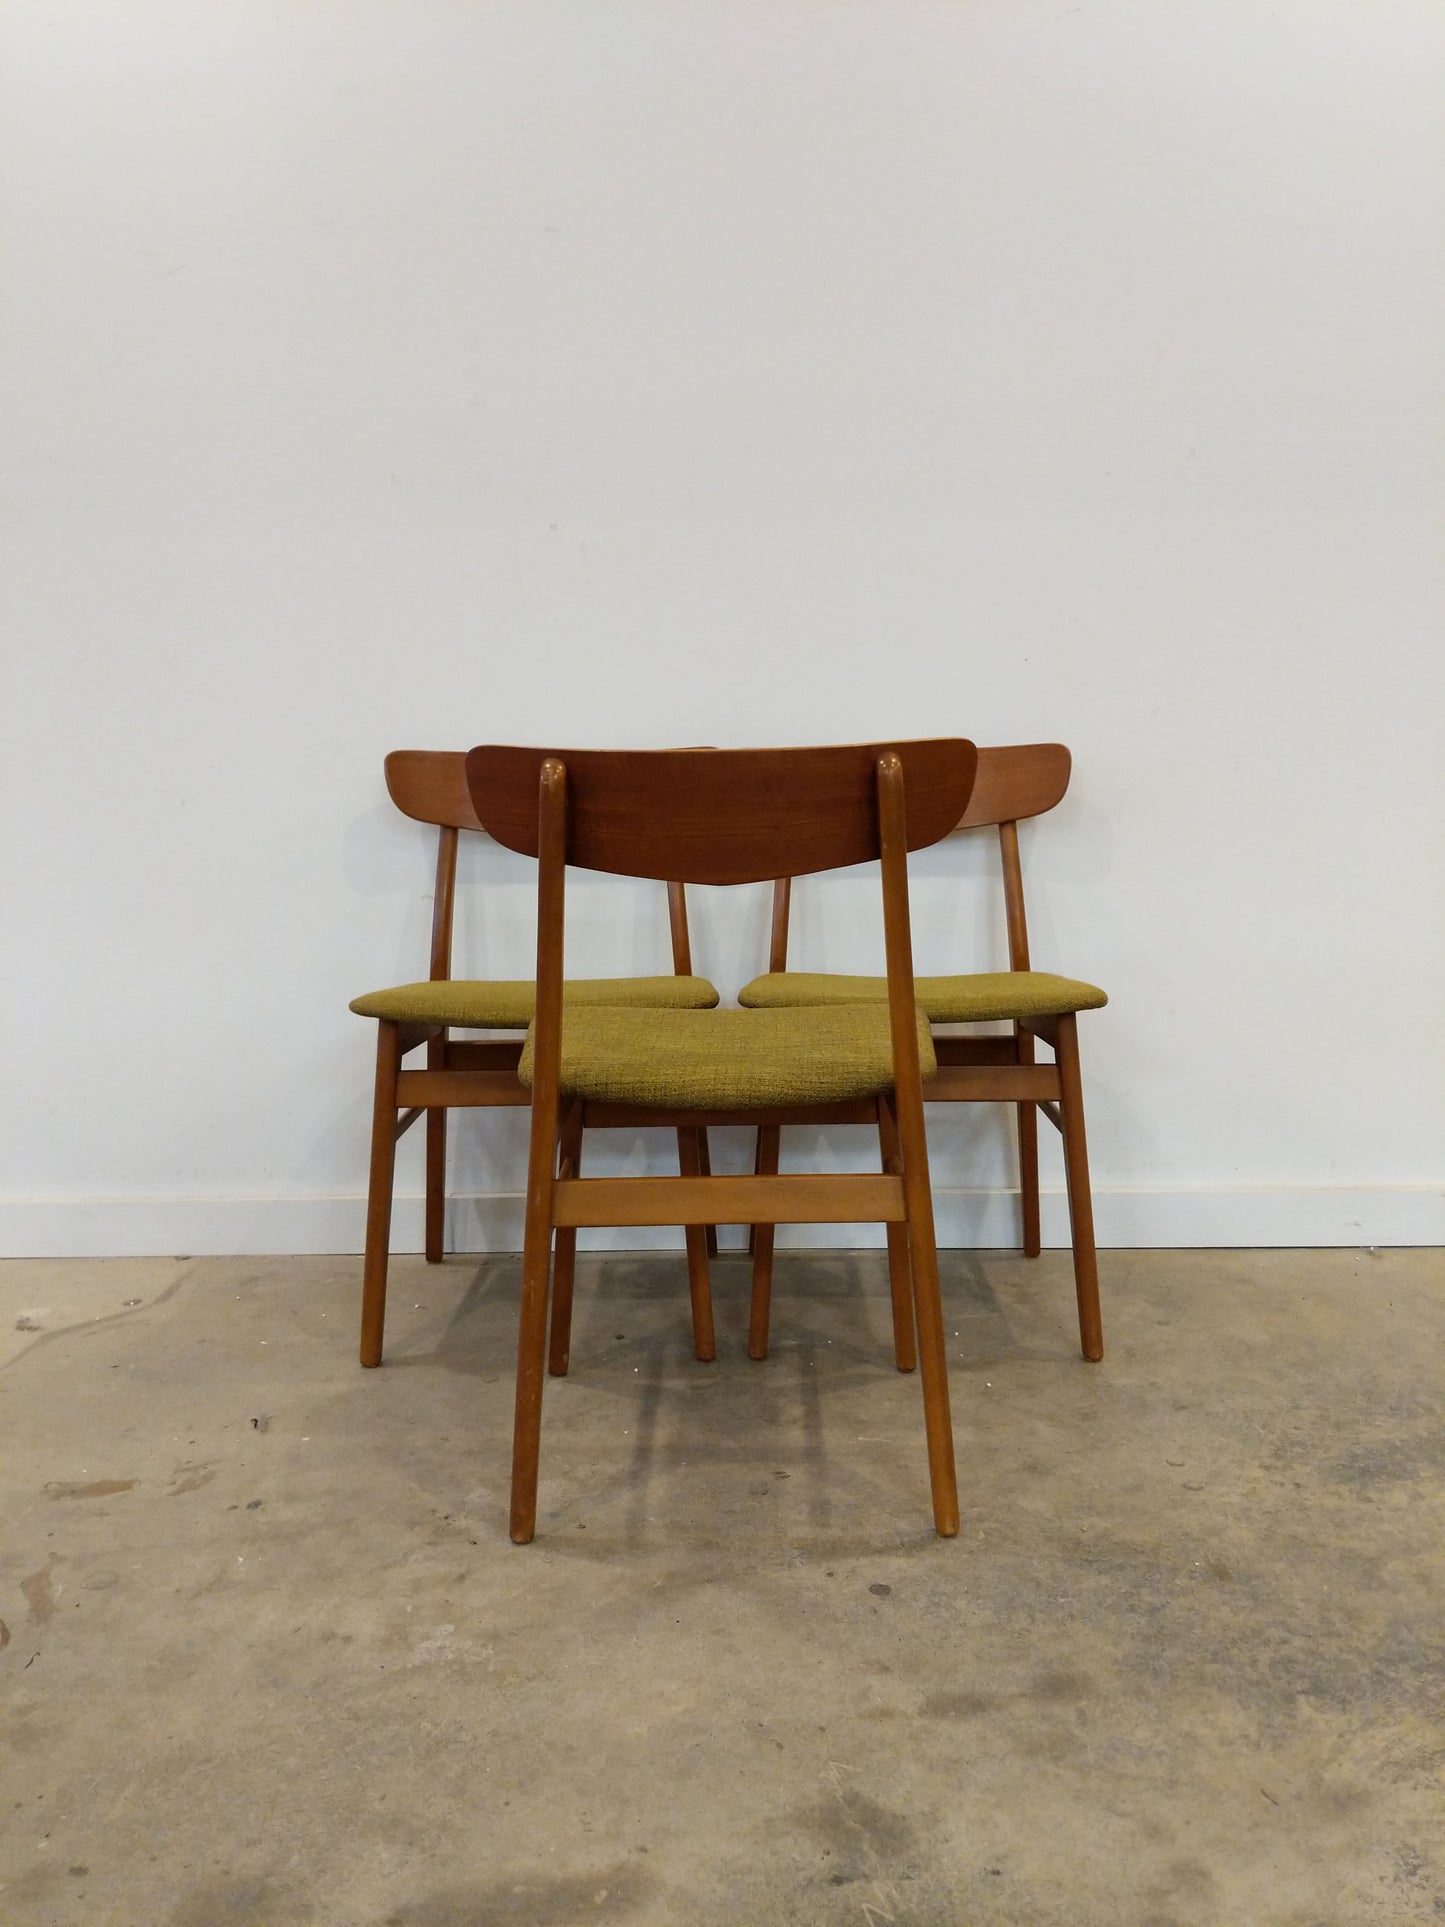 Set of 3 Vintage Danish Modern Dining Chairs